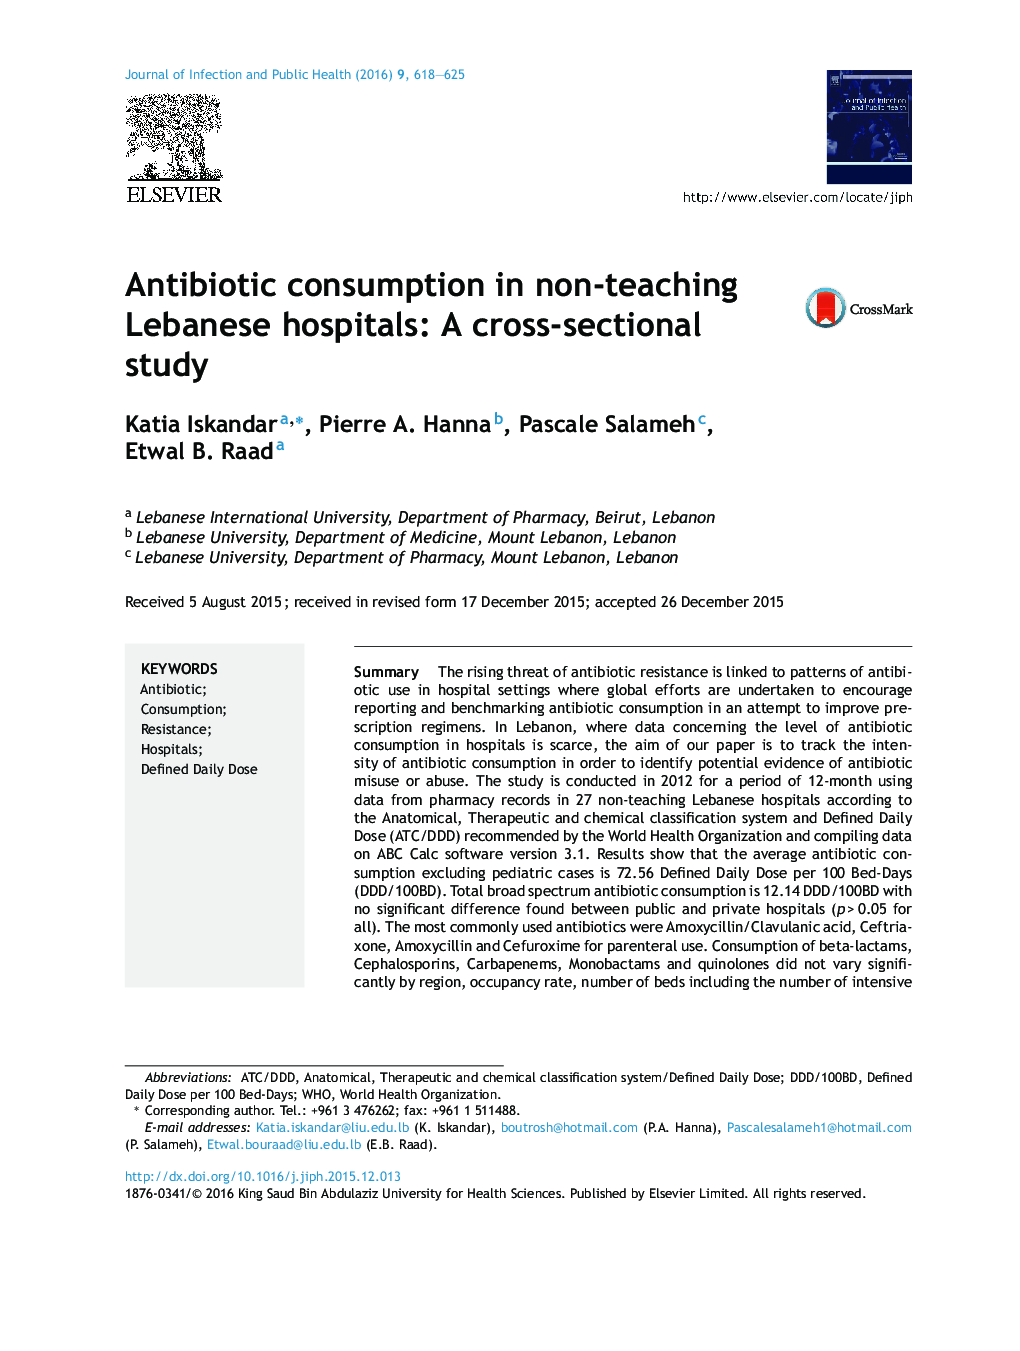 Antibiotic consumption in non-teaching Lebanese hospitals: A cross-sectional study